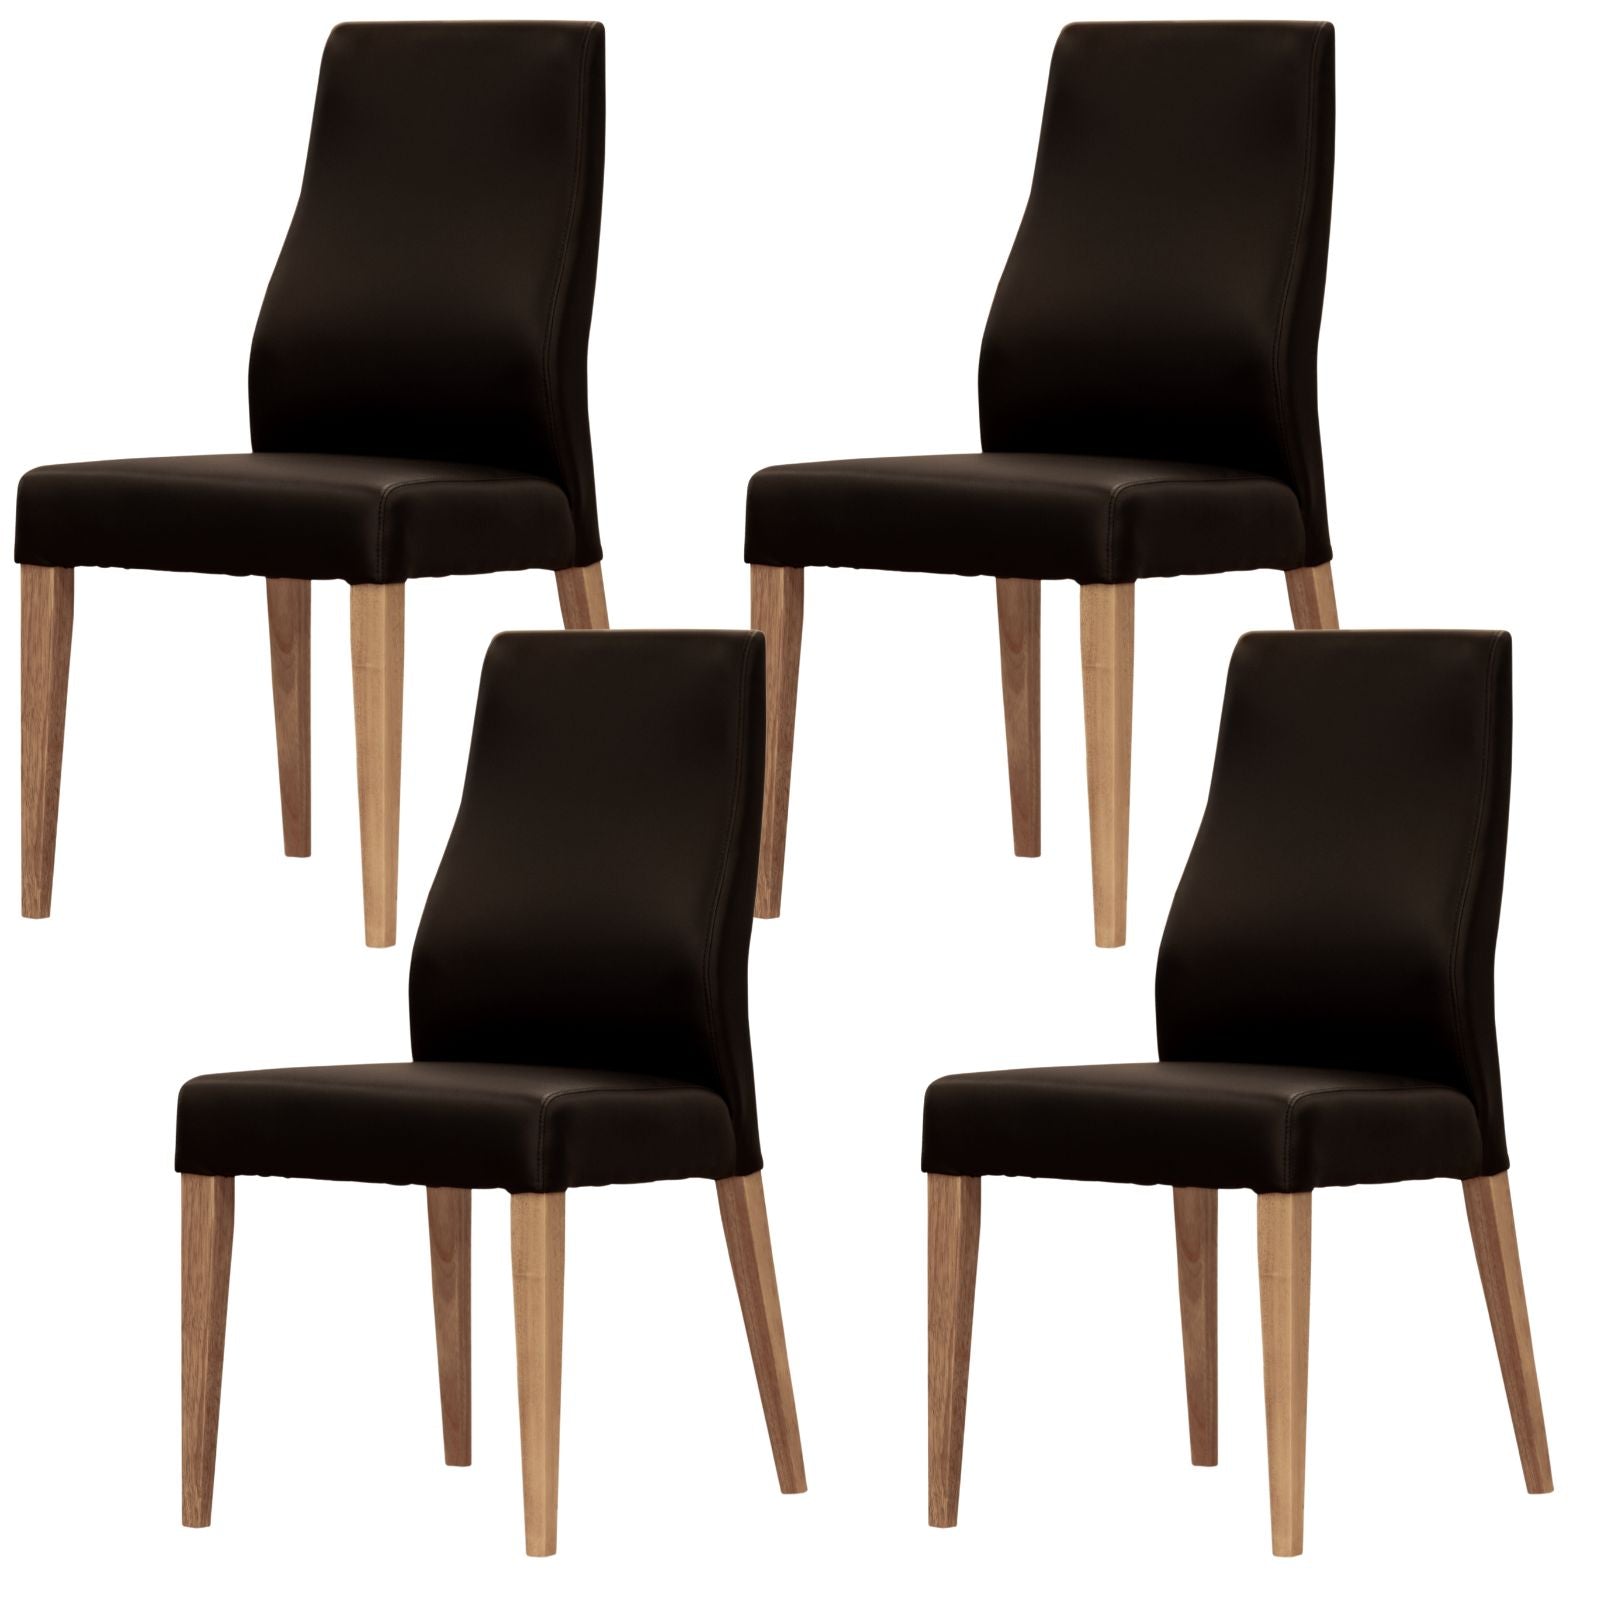 rosemallow-dining-chair-set-of-4-pu-leather-seat-solid-messmate-timber-black